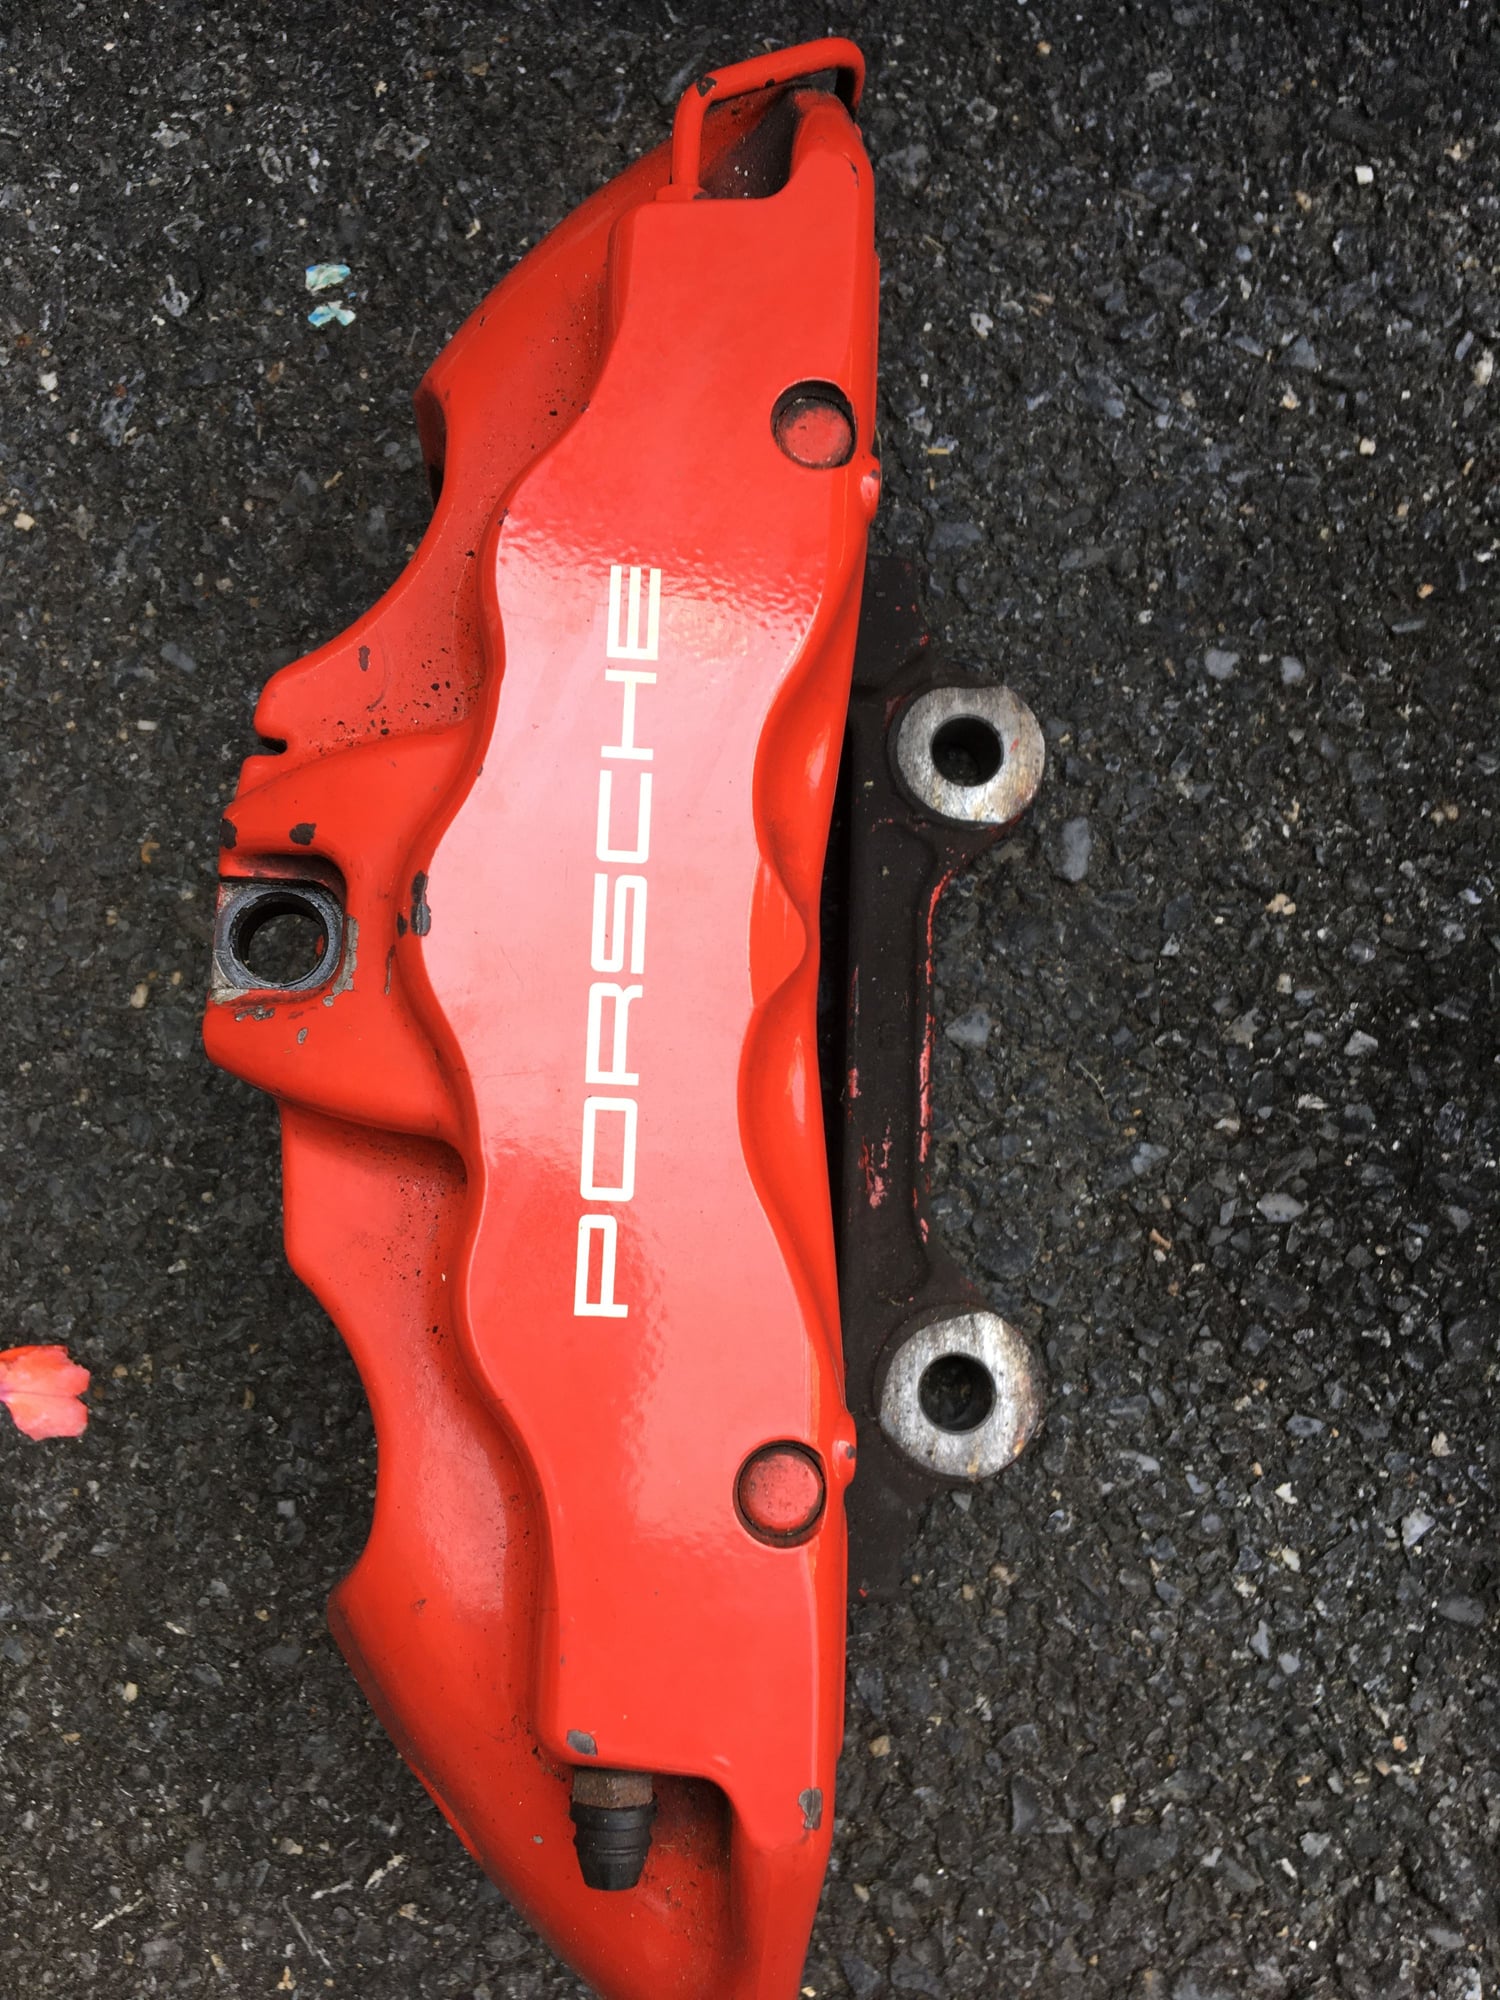 2009 Porsche Cayenne Turbo S Calipers front and rear